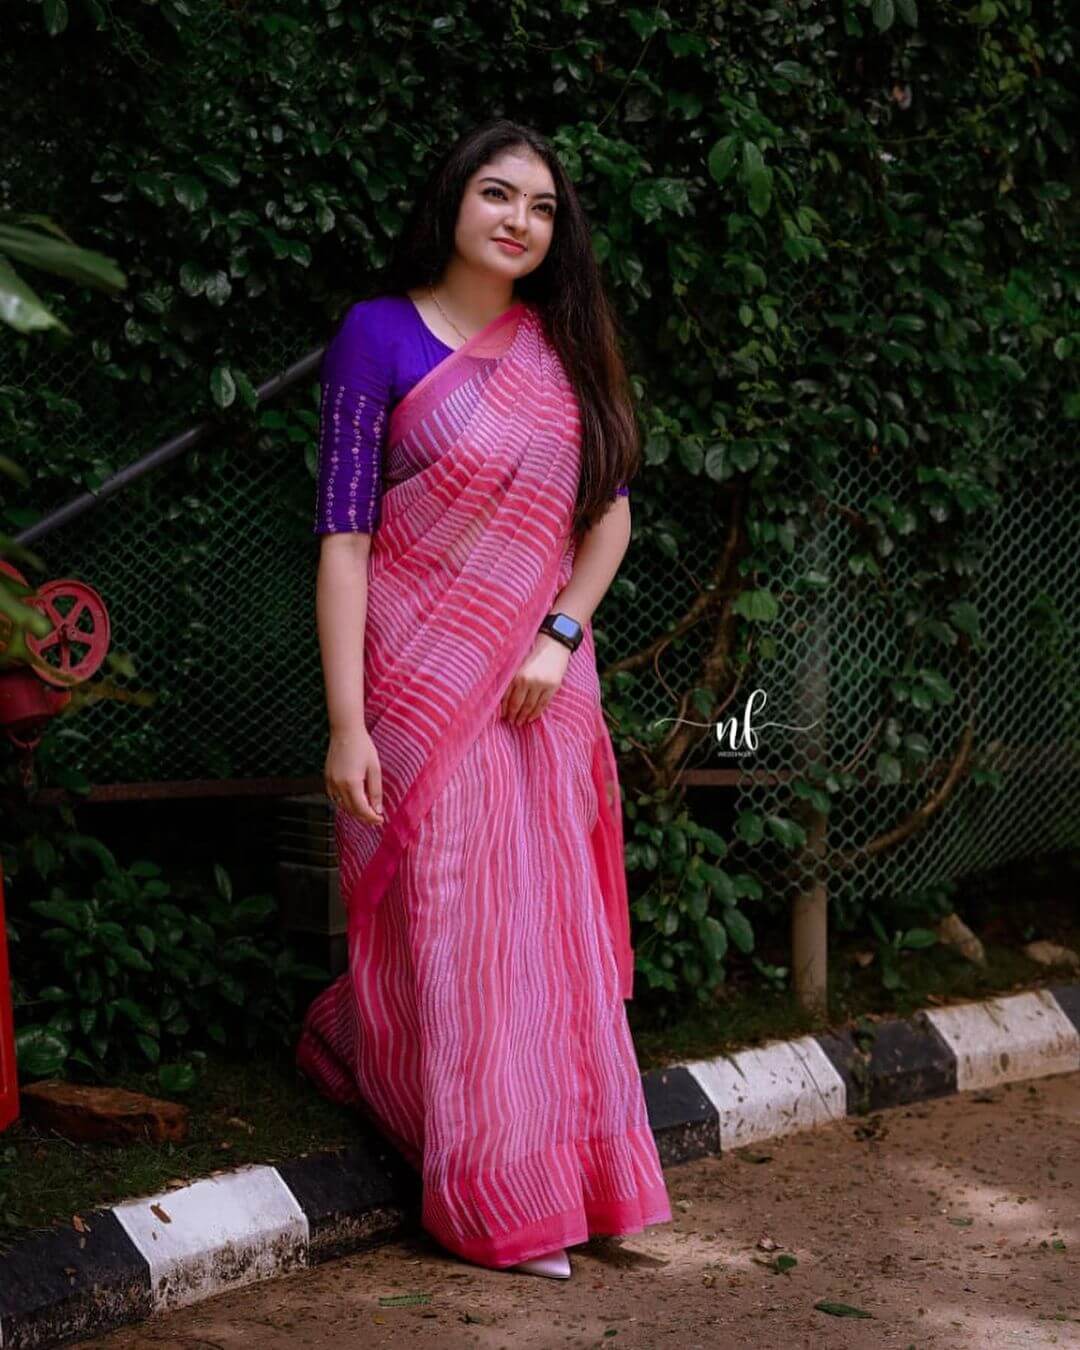 Malavika Nair Classy Look In Pink Saree With Blue Blouse Malavika Nair Traditional Outfit And Looks